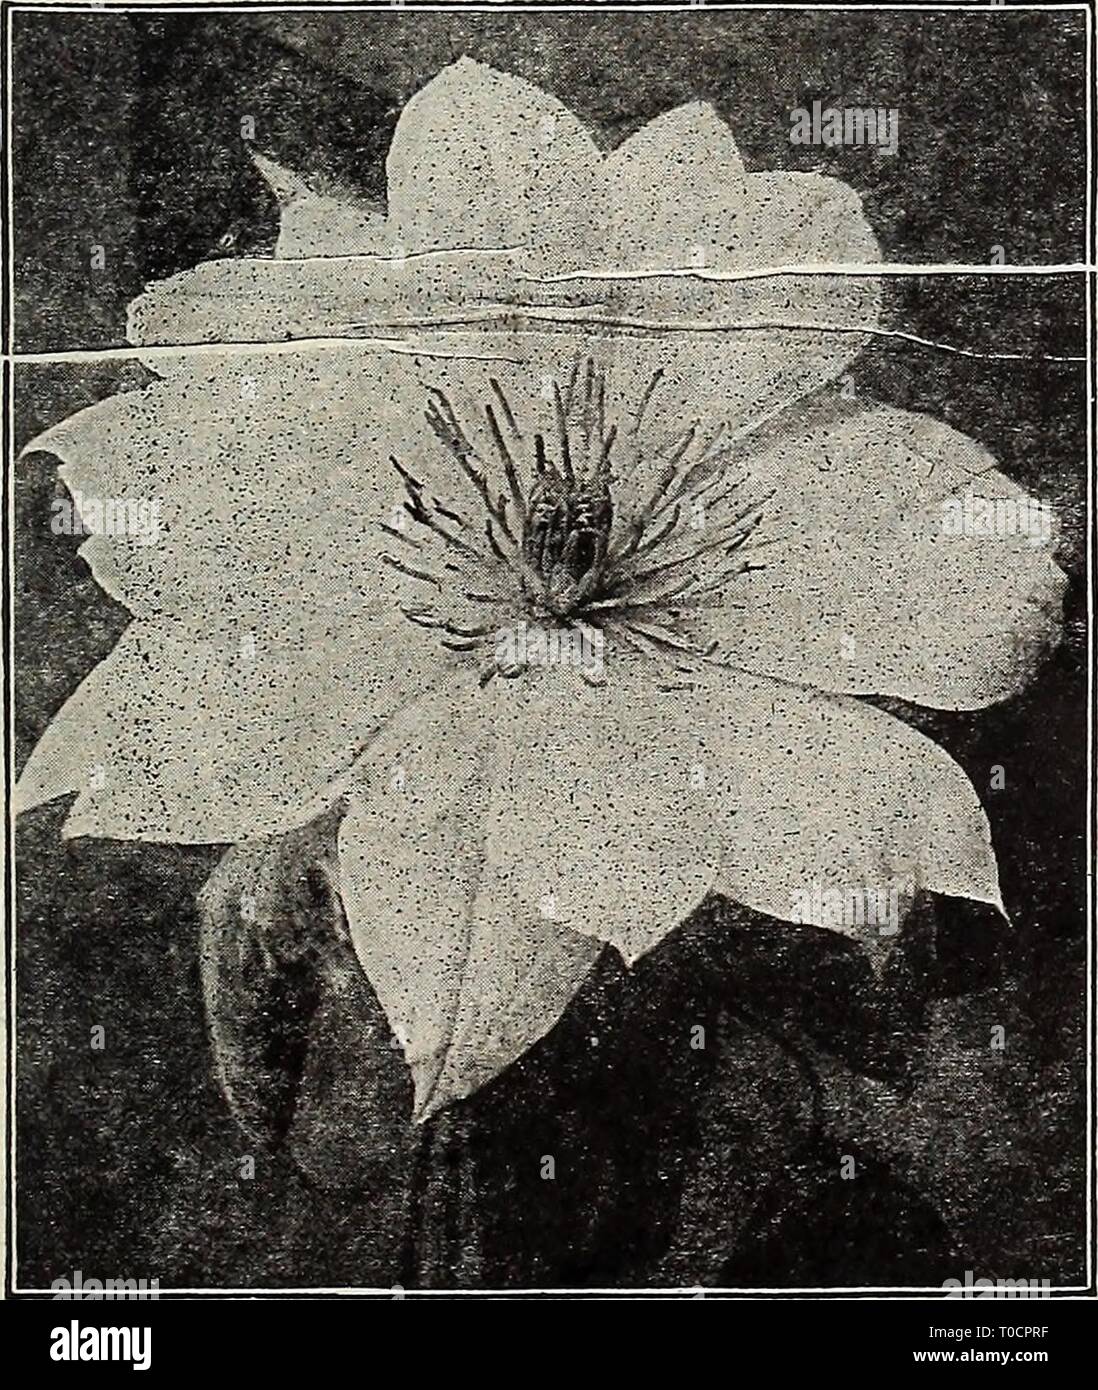 Dreer's garden book 1917 (1917) Dreer's garden book 1917 dreersgardenbook1917henr Year: 1917  VARIOUS HARDY CLEMATIS. Coccinea. Handsome bell-shaped flowers of a bright coral-red color from Tune until frost. 25 cts. each; $2.50 per doz. Crispa. Bears an abundance of pretty bell-shaped, fragrant, lavender flowers, with white centre, from June until, frost. 25 cts. each; $2.50 per doz. riontana Grandiflora. Of stronger growth than any other Clematis, and succeeds under the most adverse conditions, and is perfectly hardy. Its flowers, which resemble the Anemone or Windflower, are snow-white, 1£ t Stock Photo